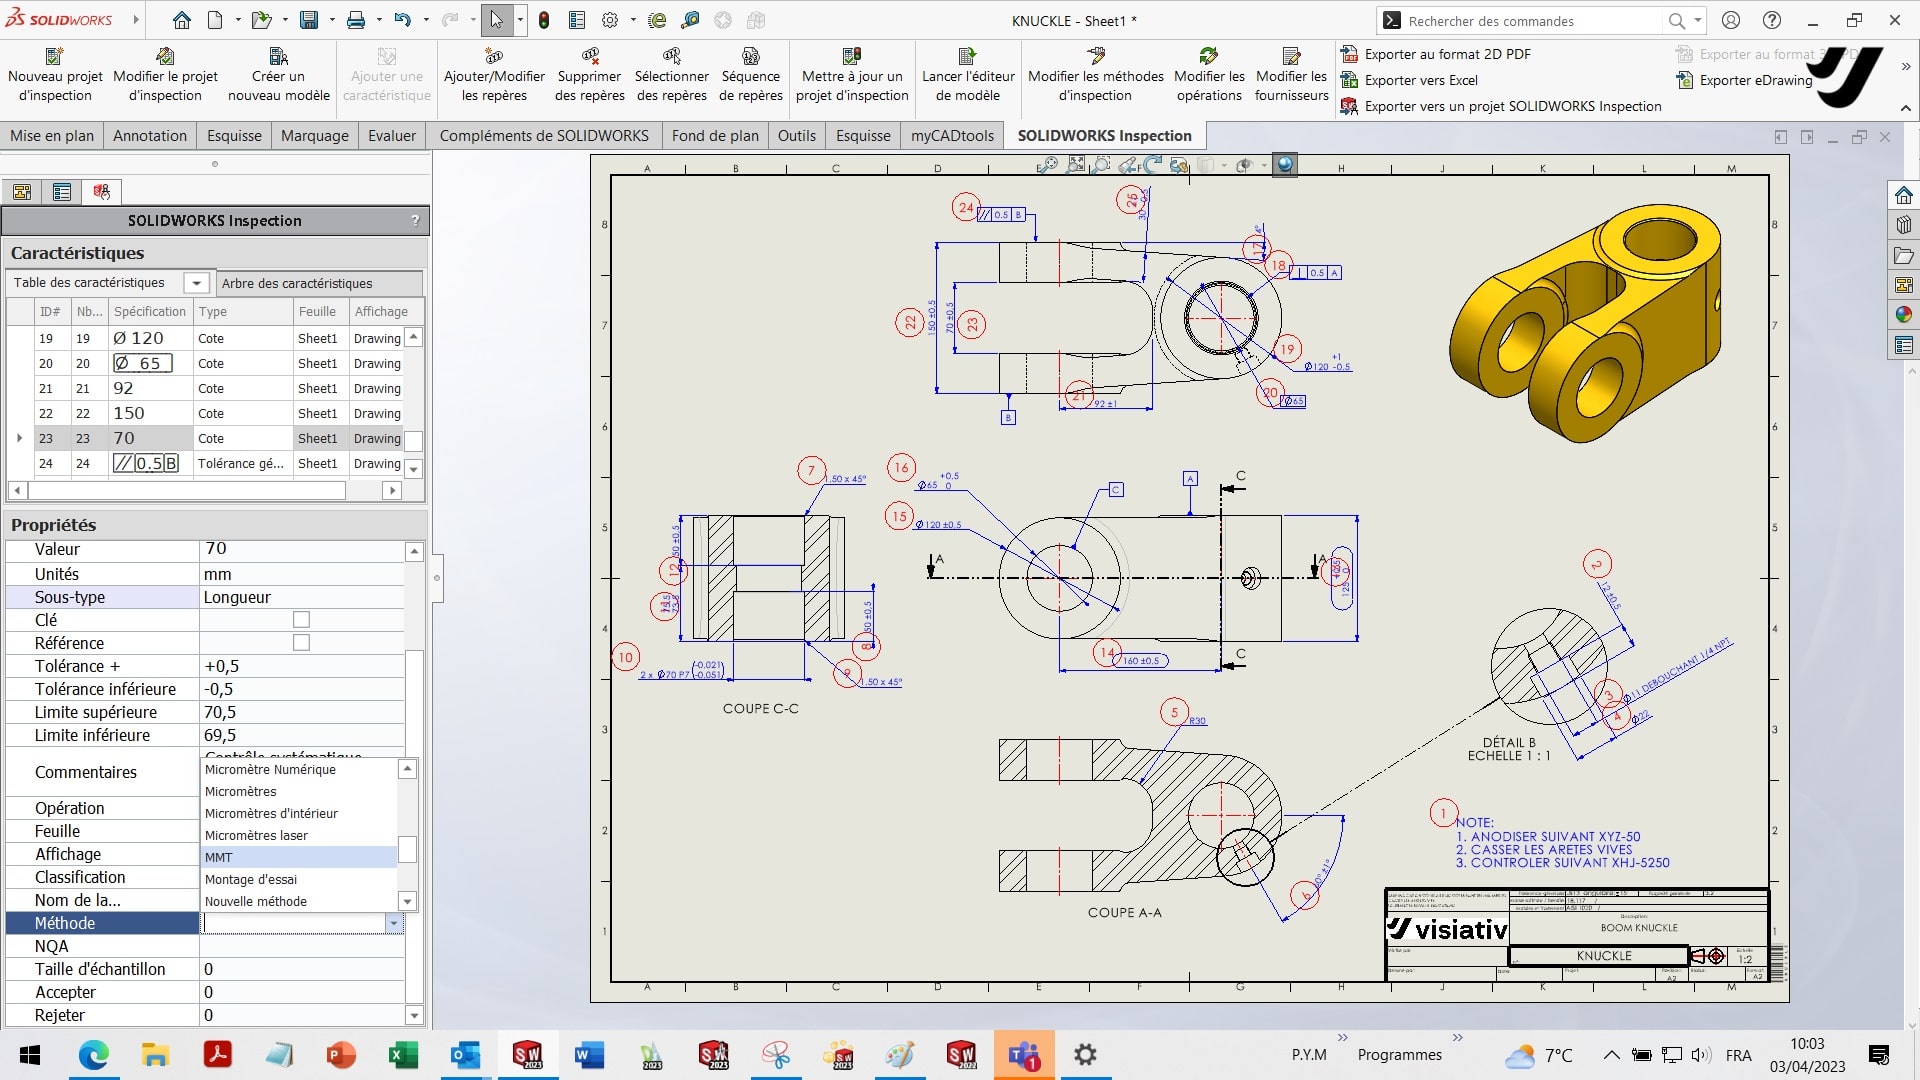 solidworks inspection